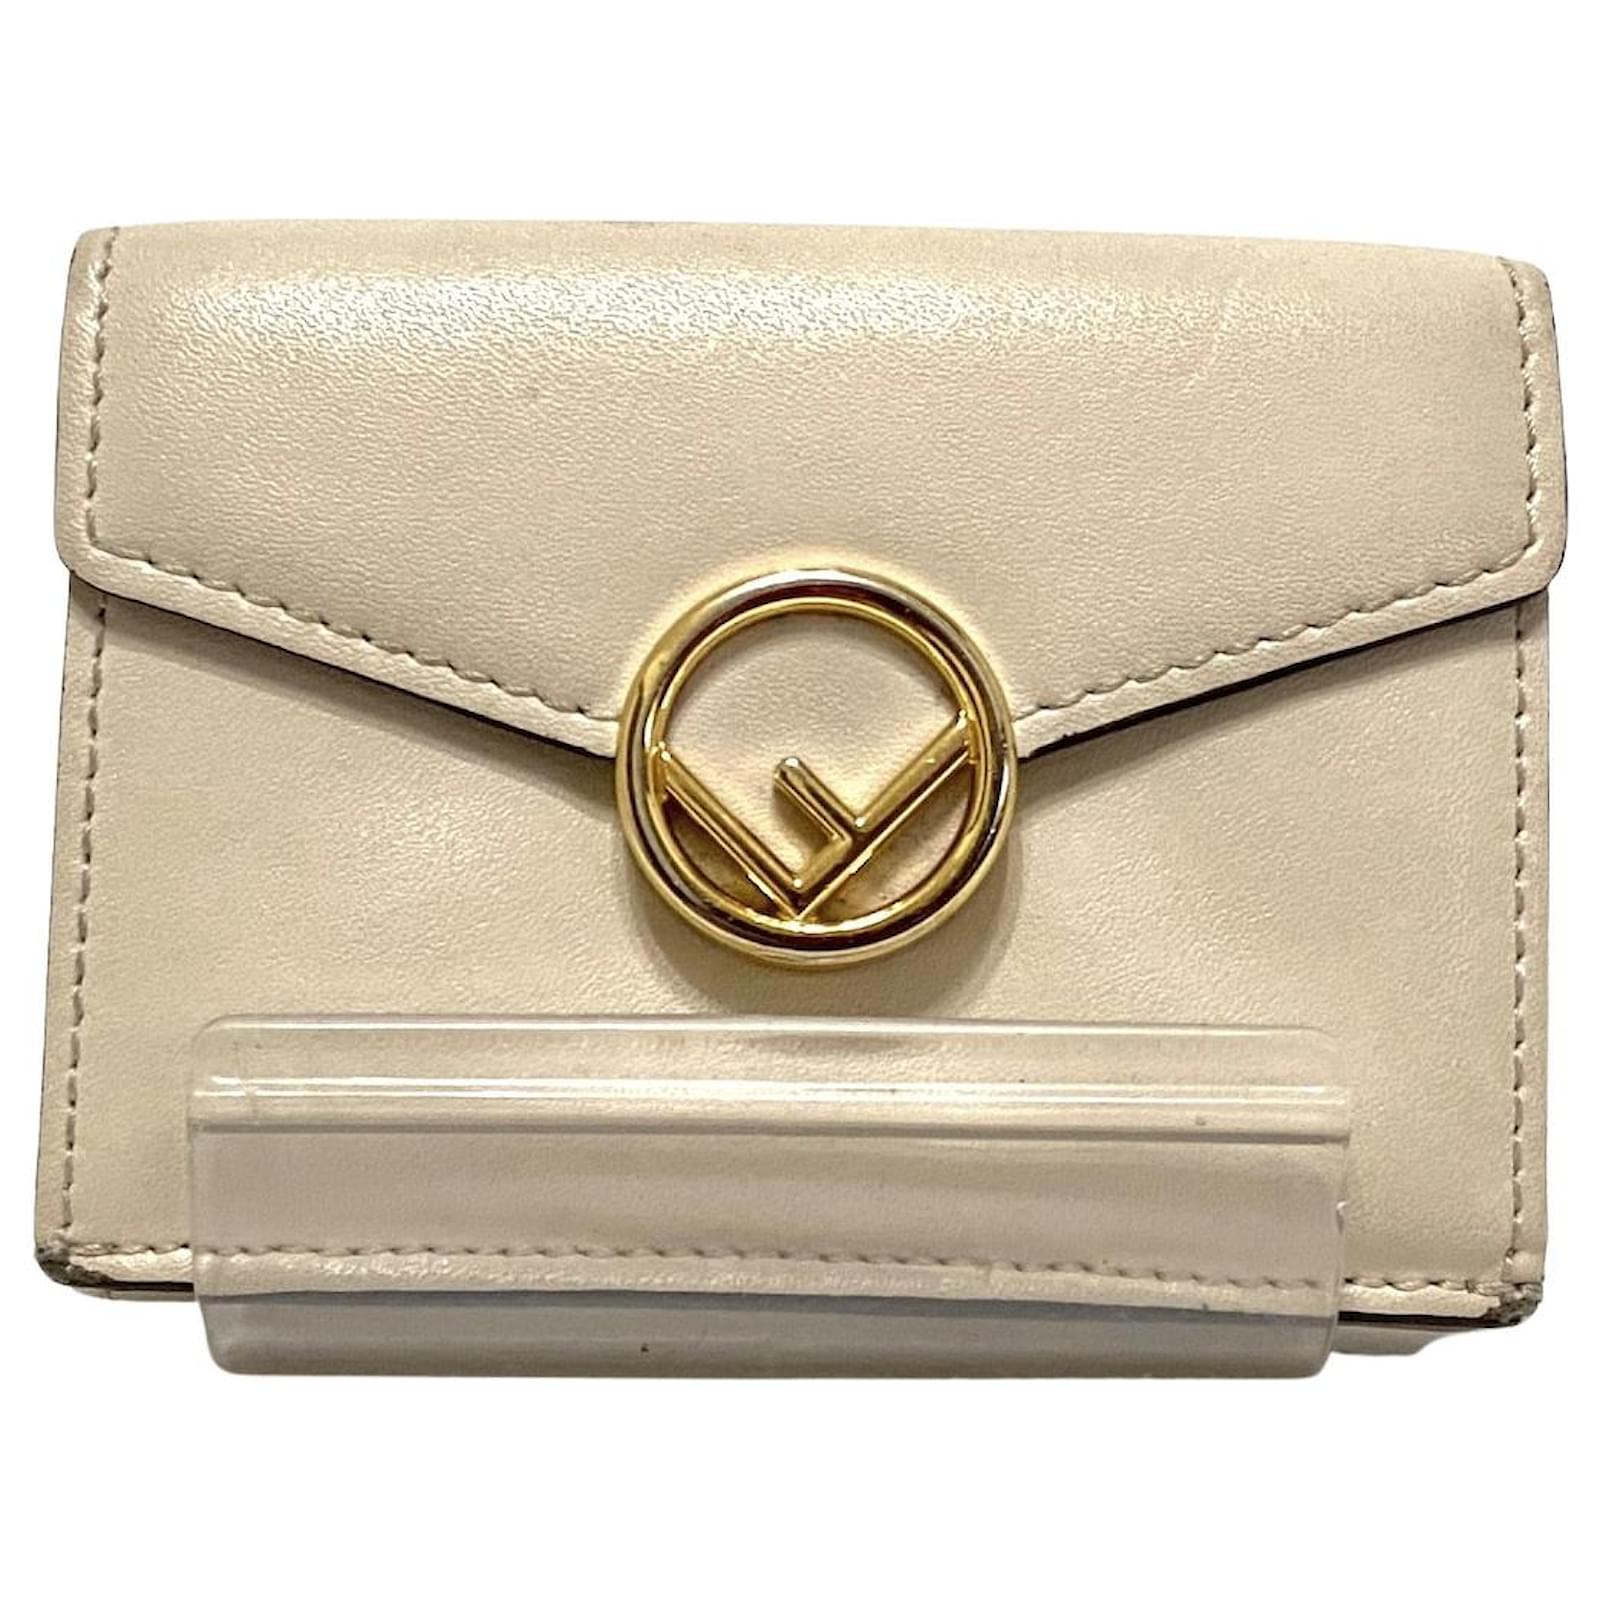 Micro Trifold - Golden leather wallet